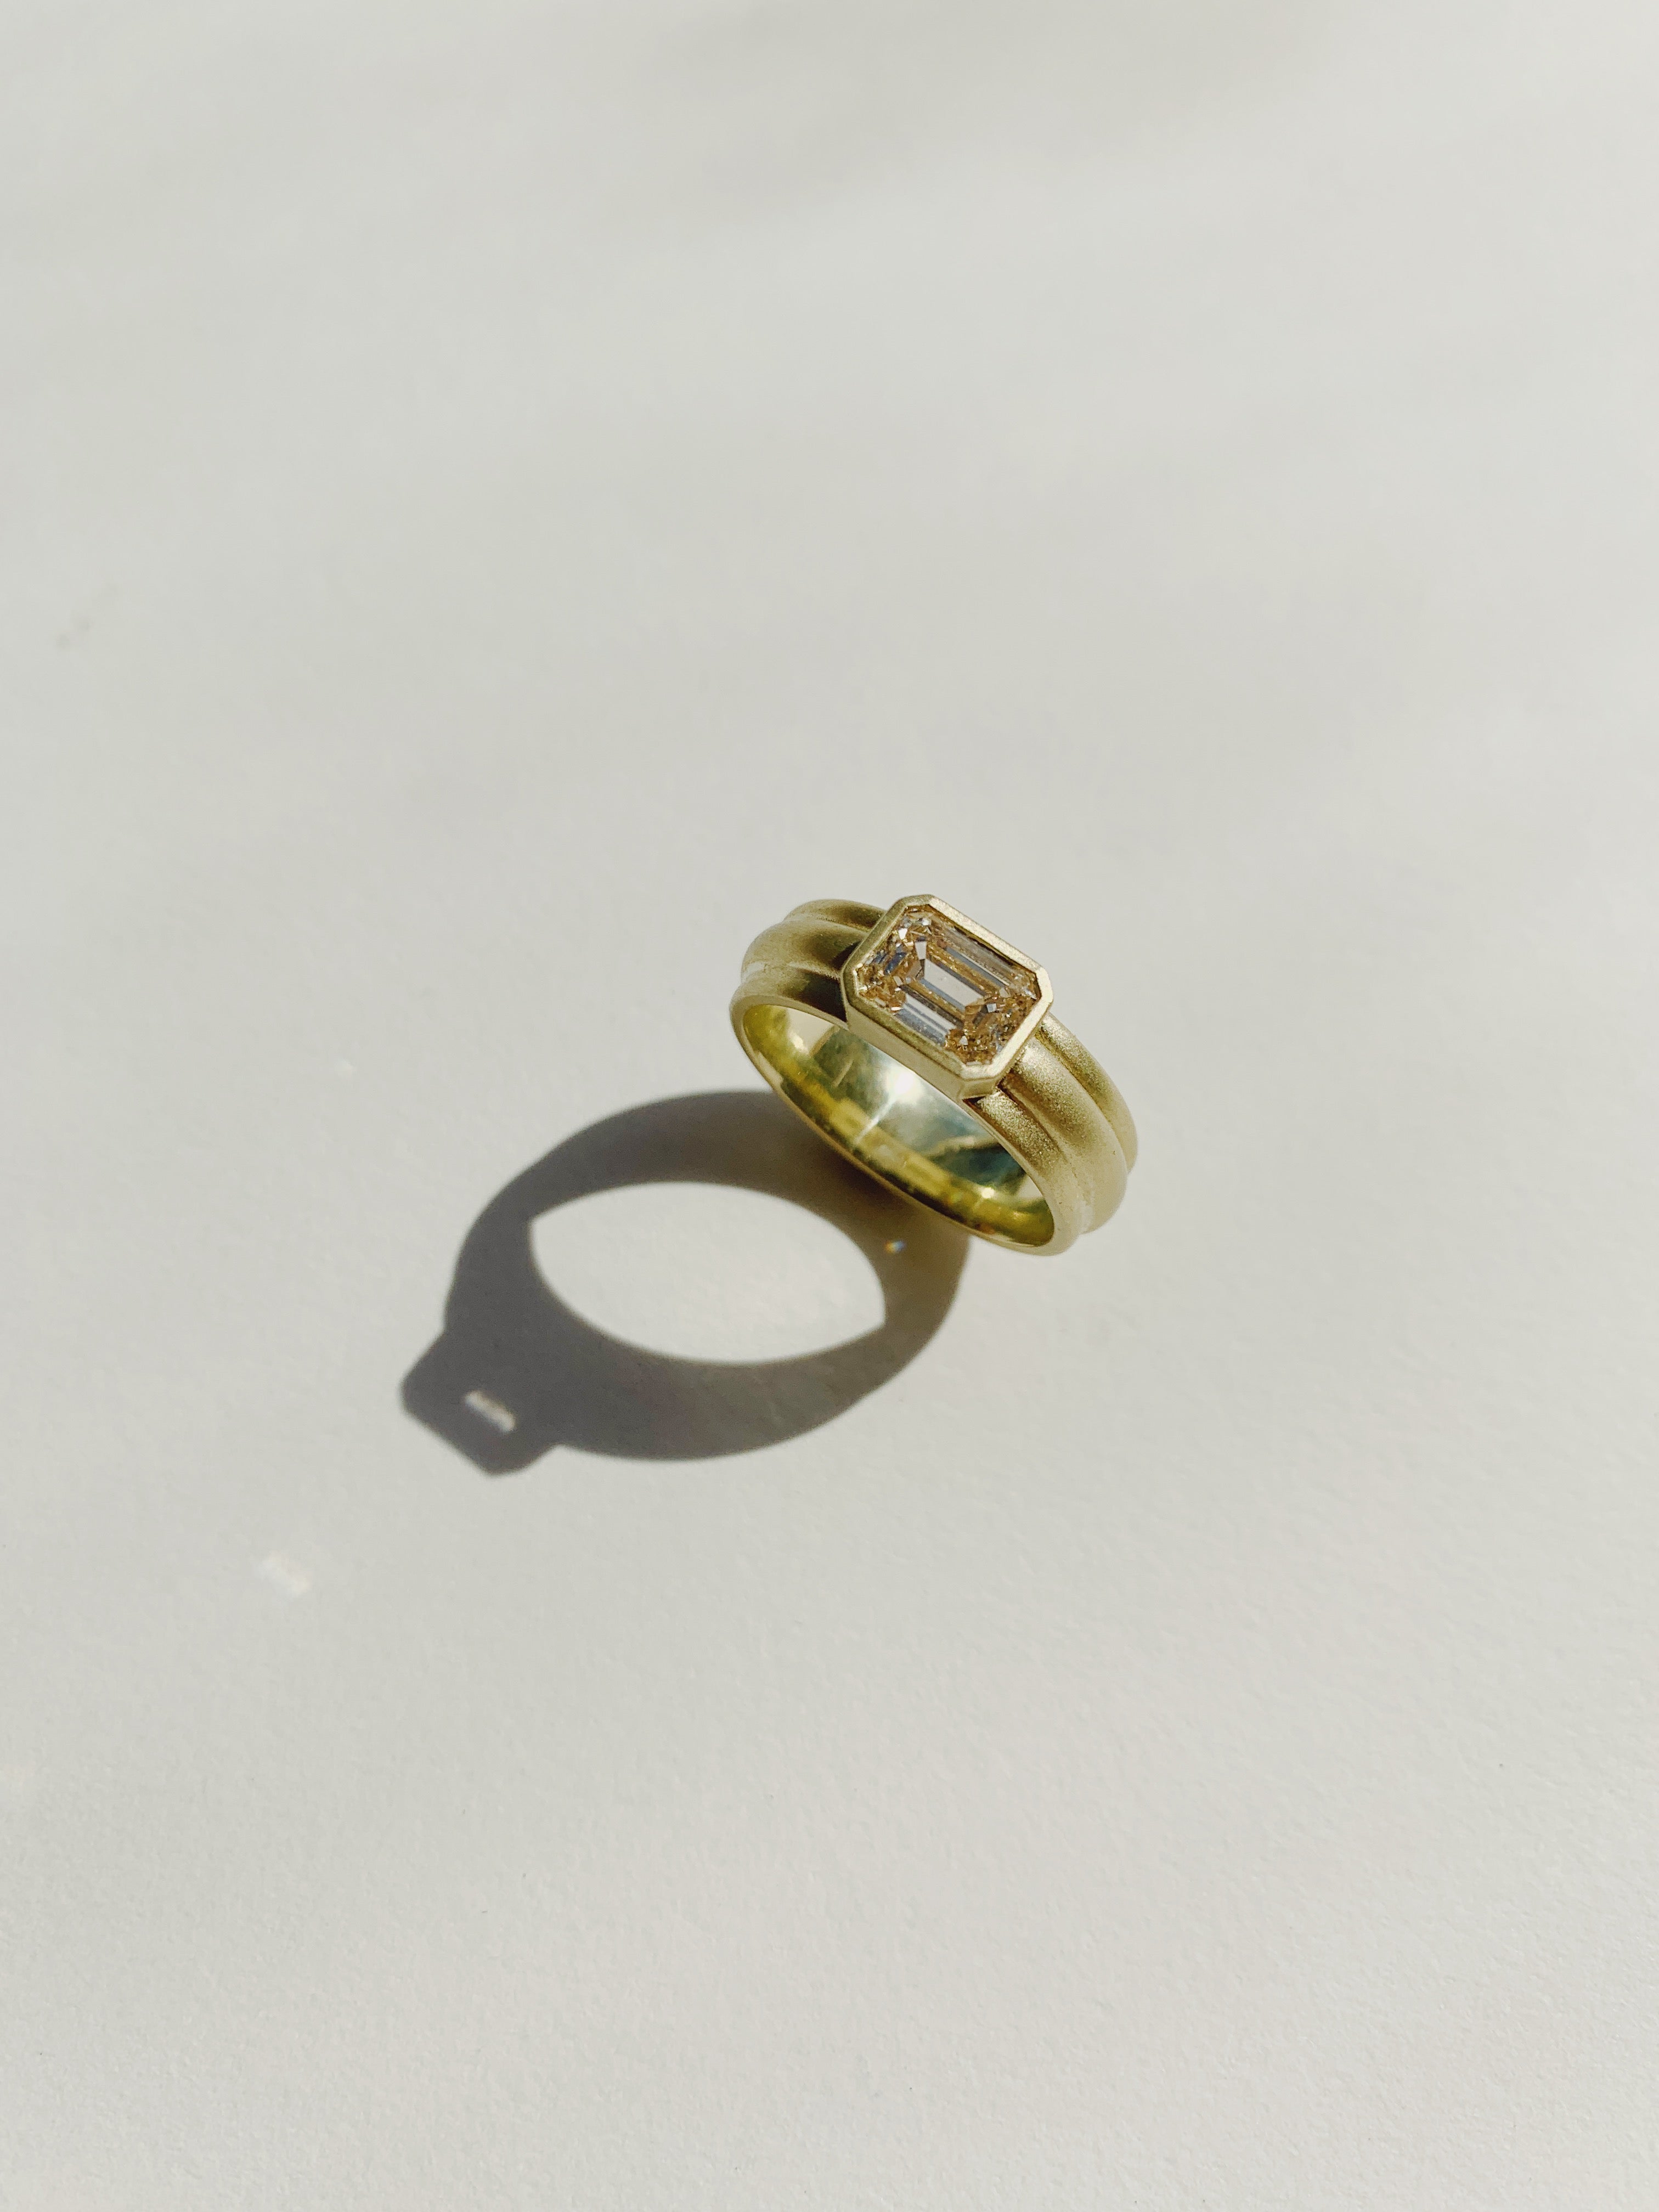 Wide Column Solitaire in 18k Green Gold with Emerald Cut Champagne Diamond